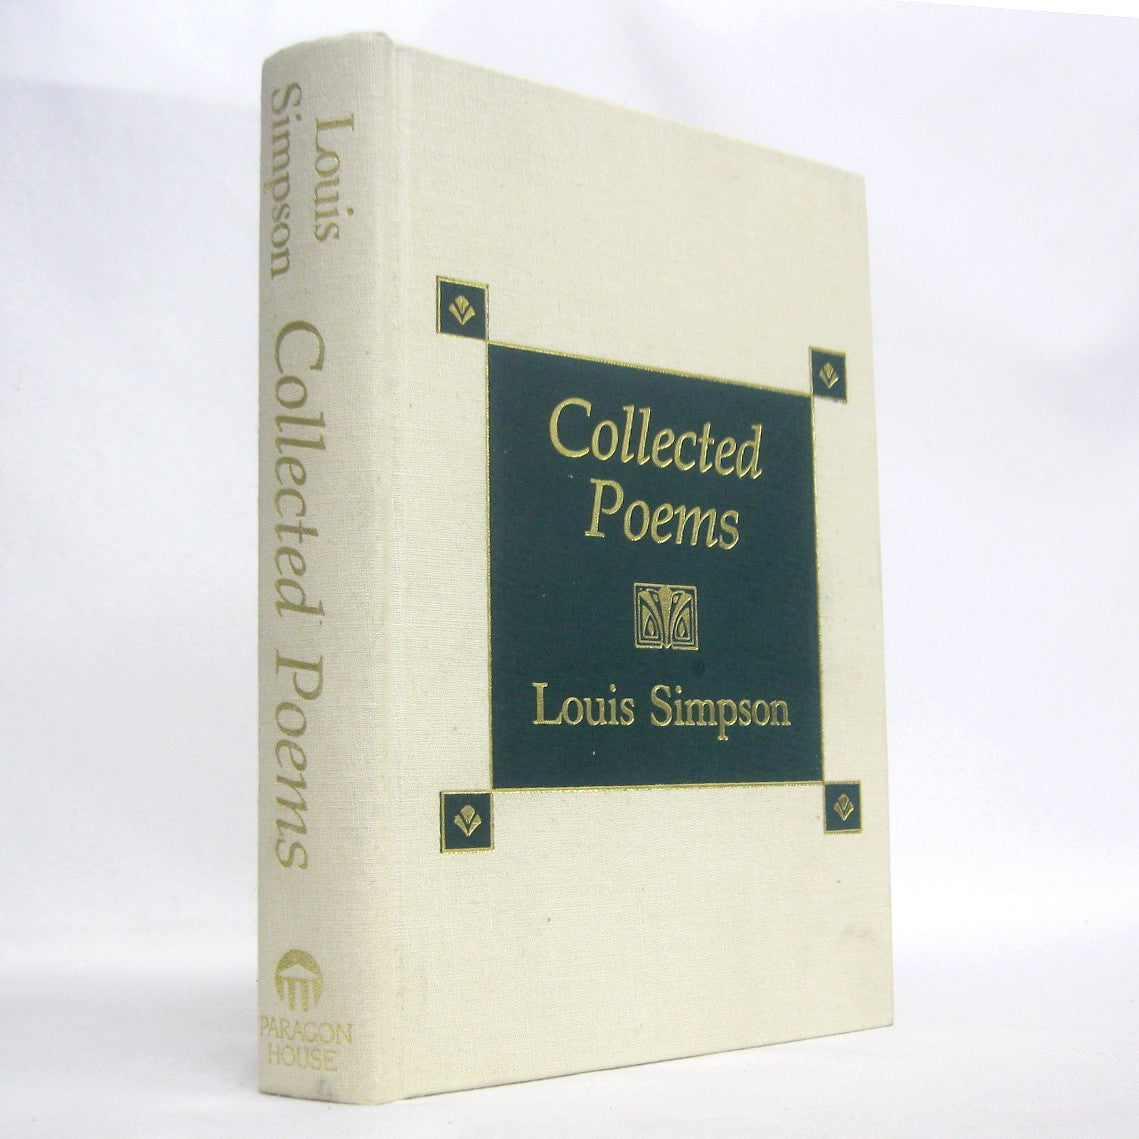 Collected Poems by Louis Simpson